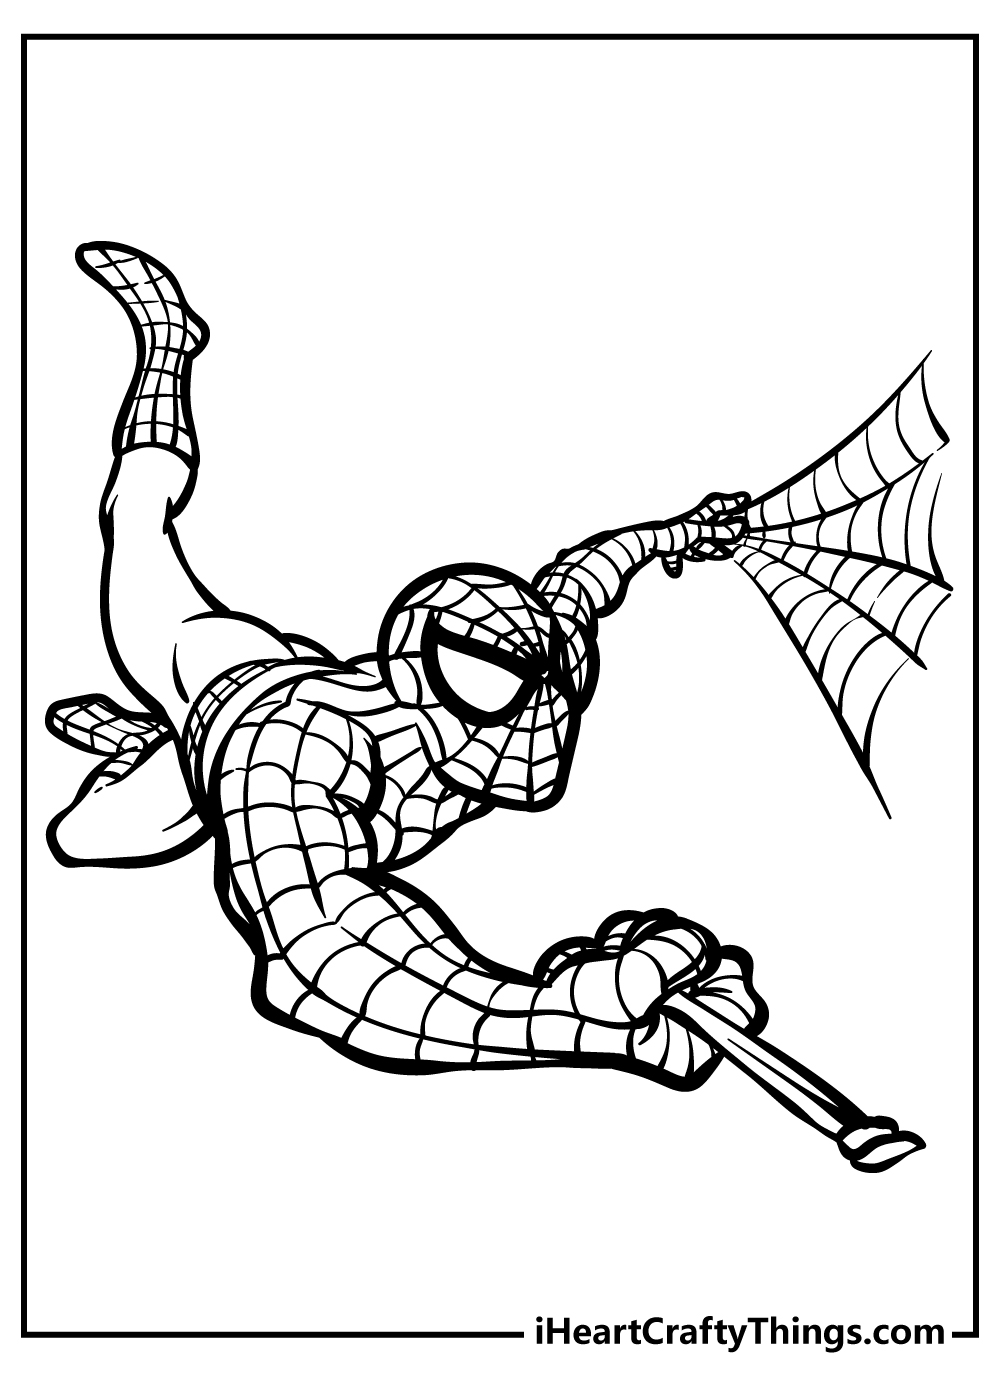 Spider-Man Coloring Pages for adults free printable